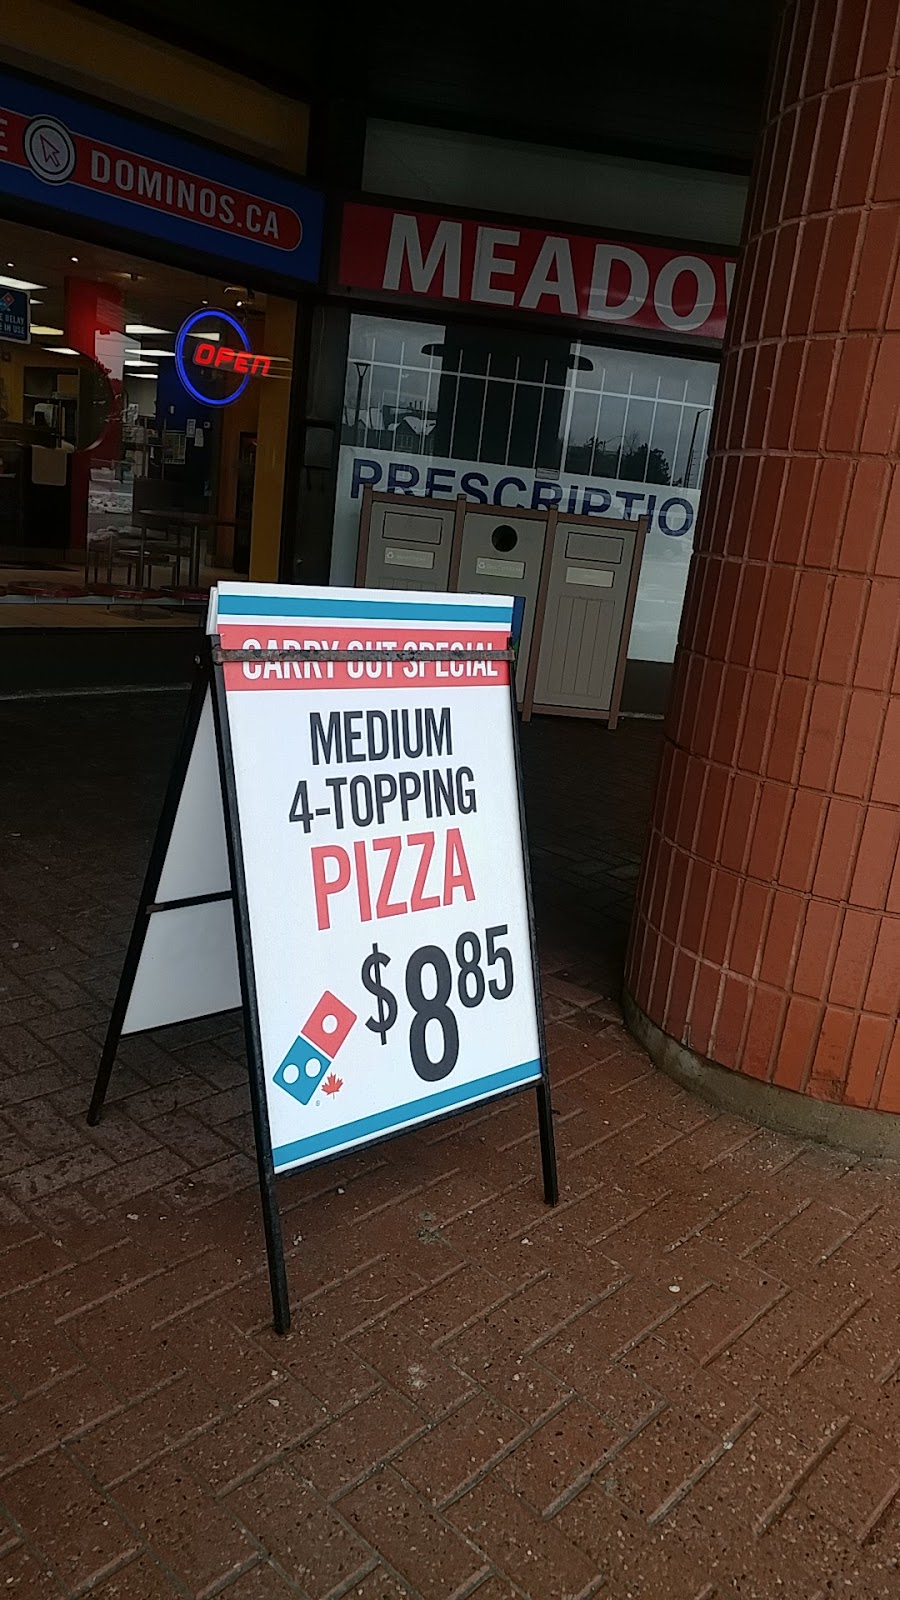 Dominos Meadowvale | 6750 Winston Churchill Blvd, Mississauga, ON L5N 4C4, Canada | Phone: (905) 824-0300